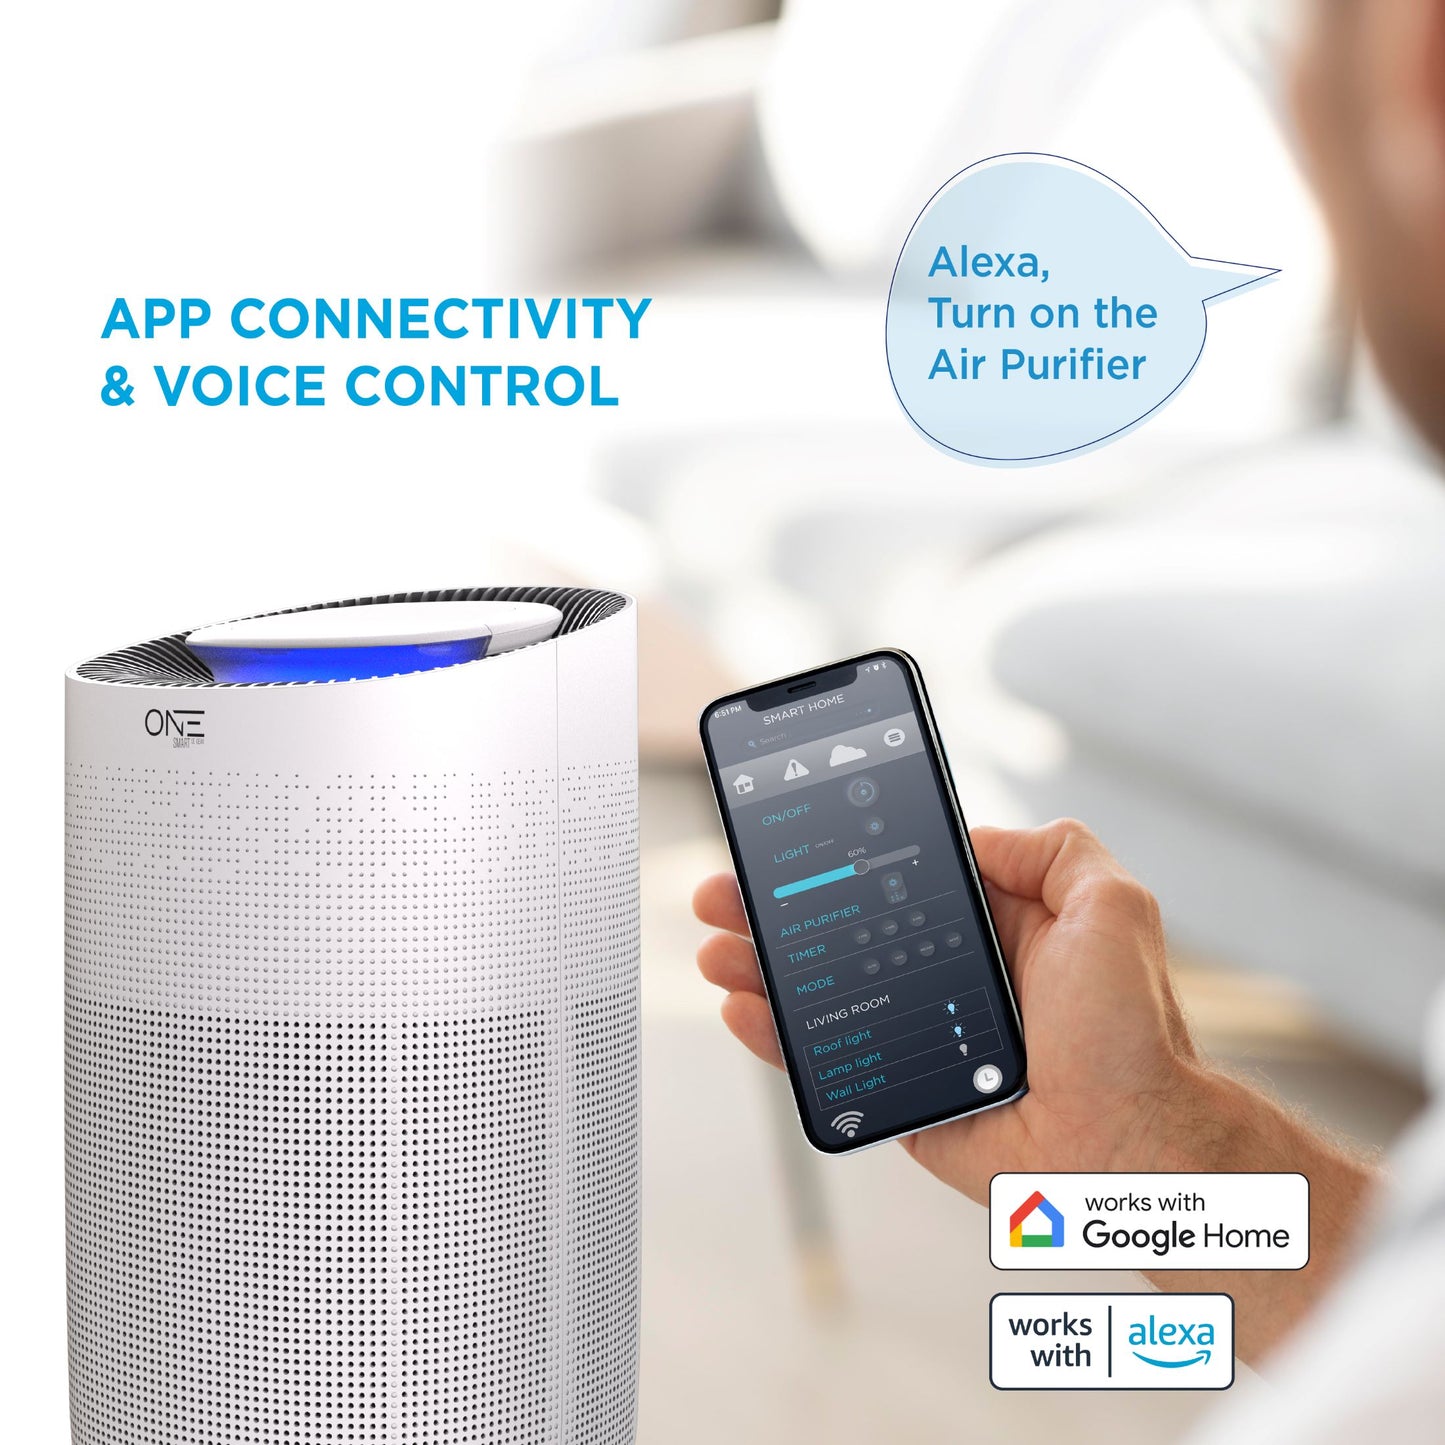 ONE Products NEO Smart Air Purifier with WiFi (OSAP02)